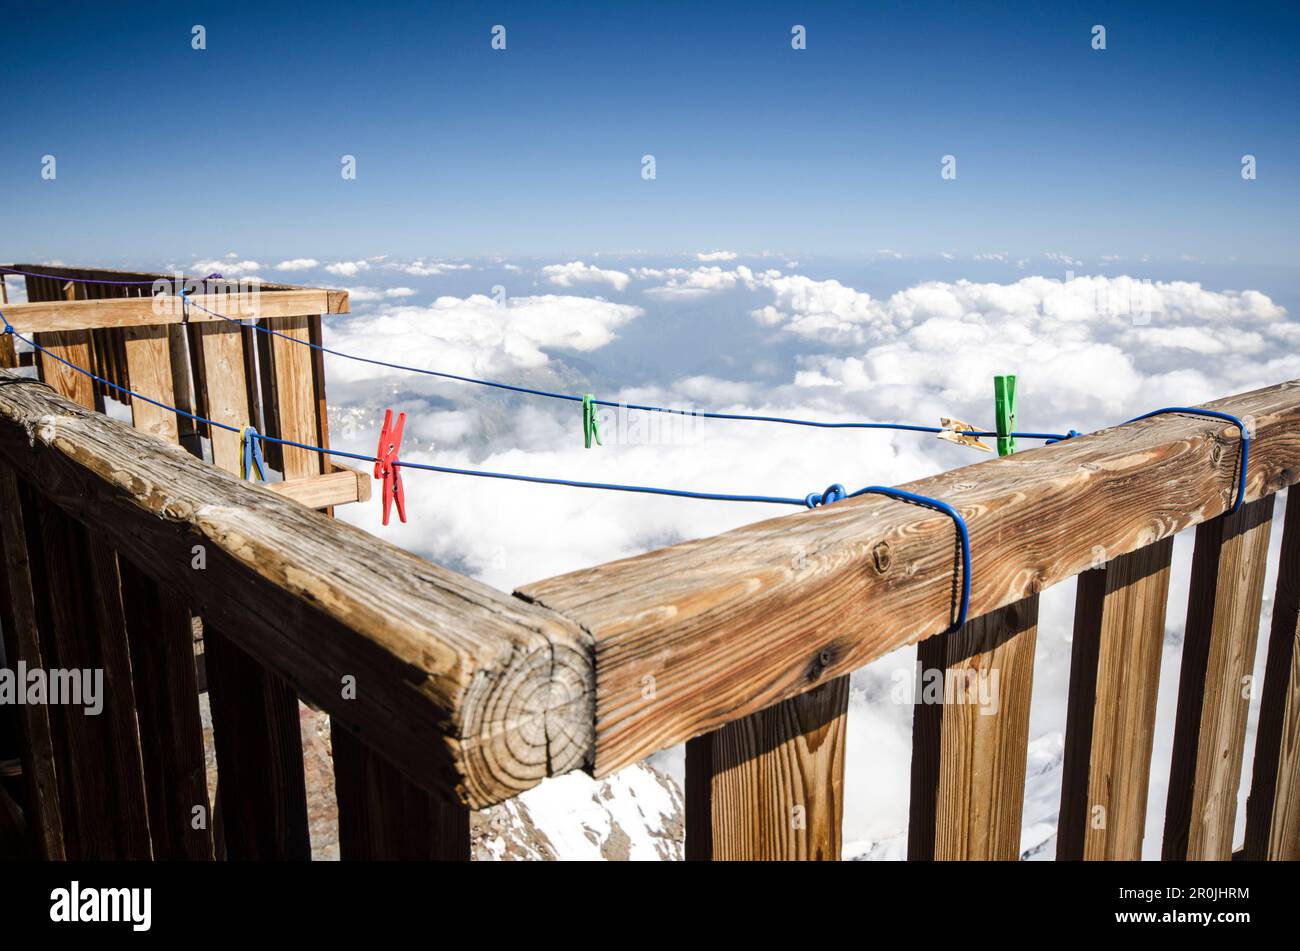 Clothes line and pegs in front of the Margherita Hut on the summit of the 4554 meter high Signalkuppe or Punta Gnifetti, highest hut in the Alps, belo Stock Photo